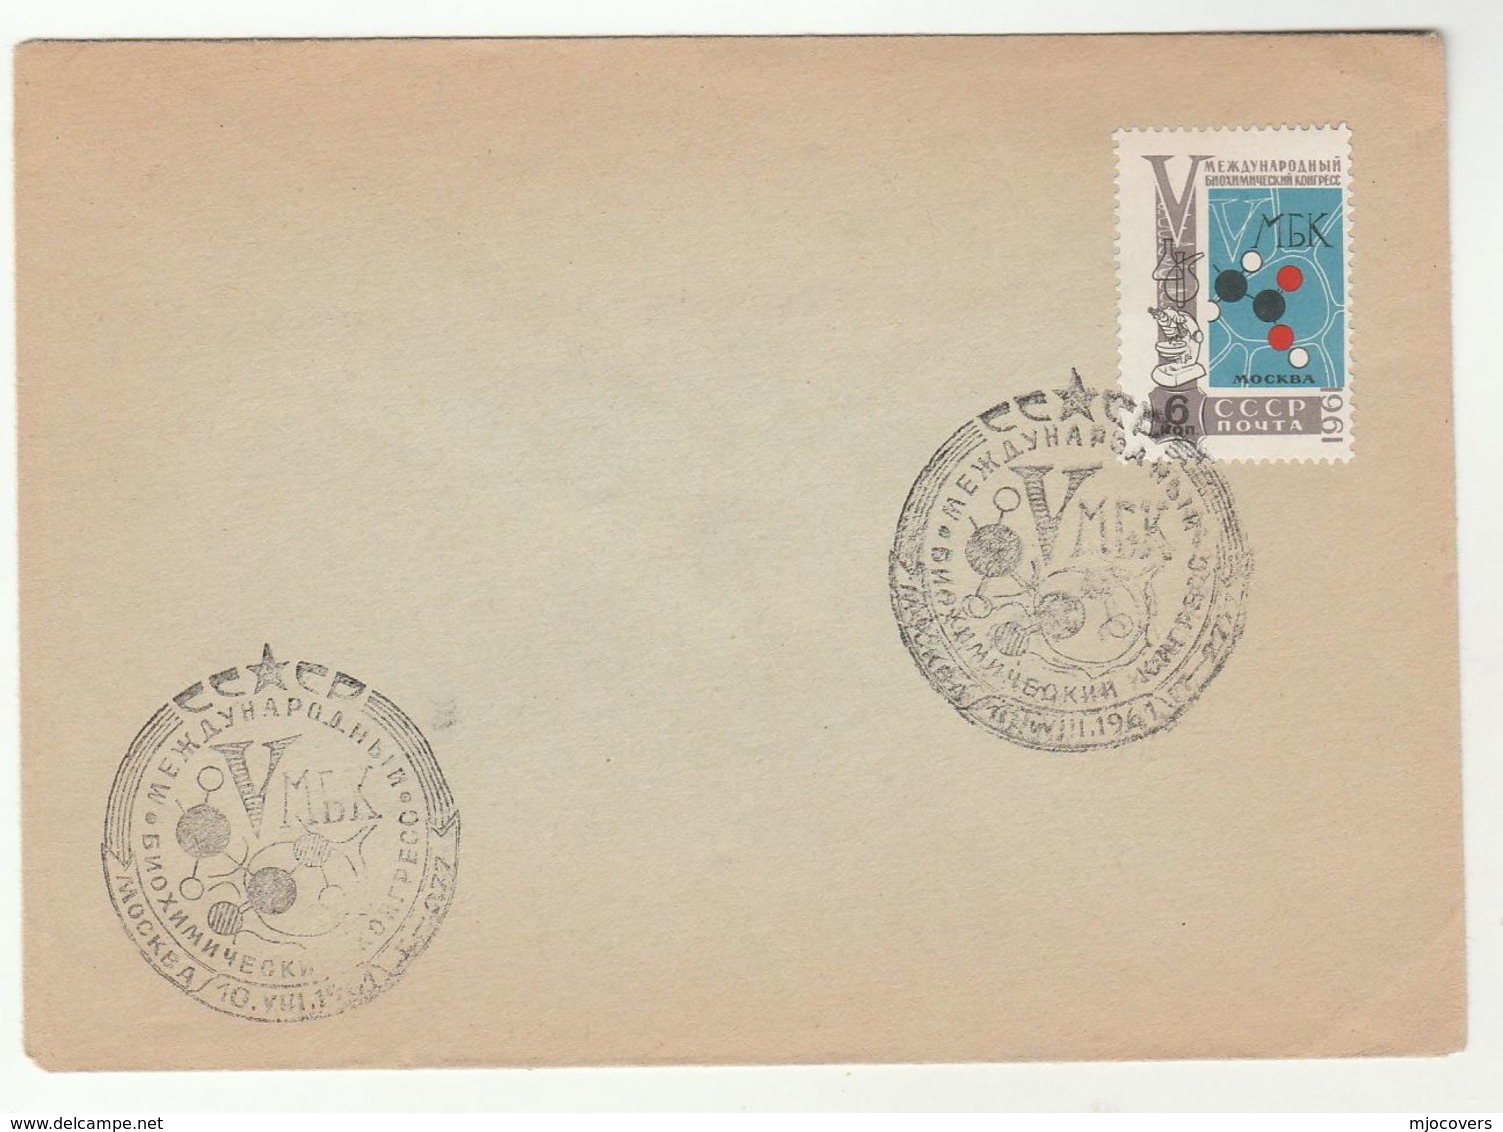 1961 COVER Russia BIOCHEMISTRY CONGRESS International EVENT Chemistry Medicine Health Stamps - Química